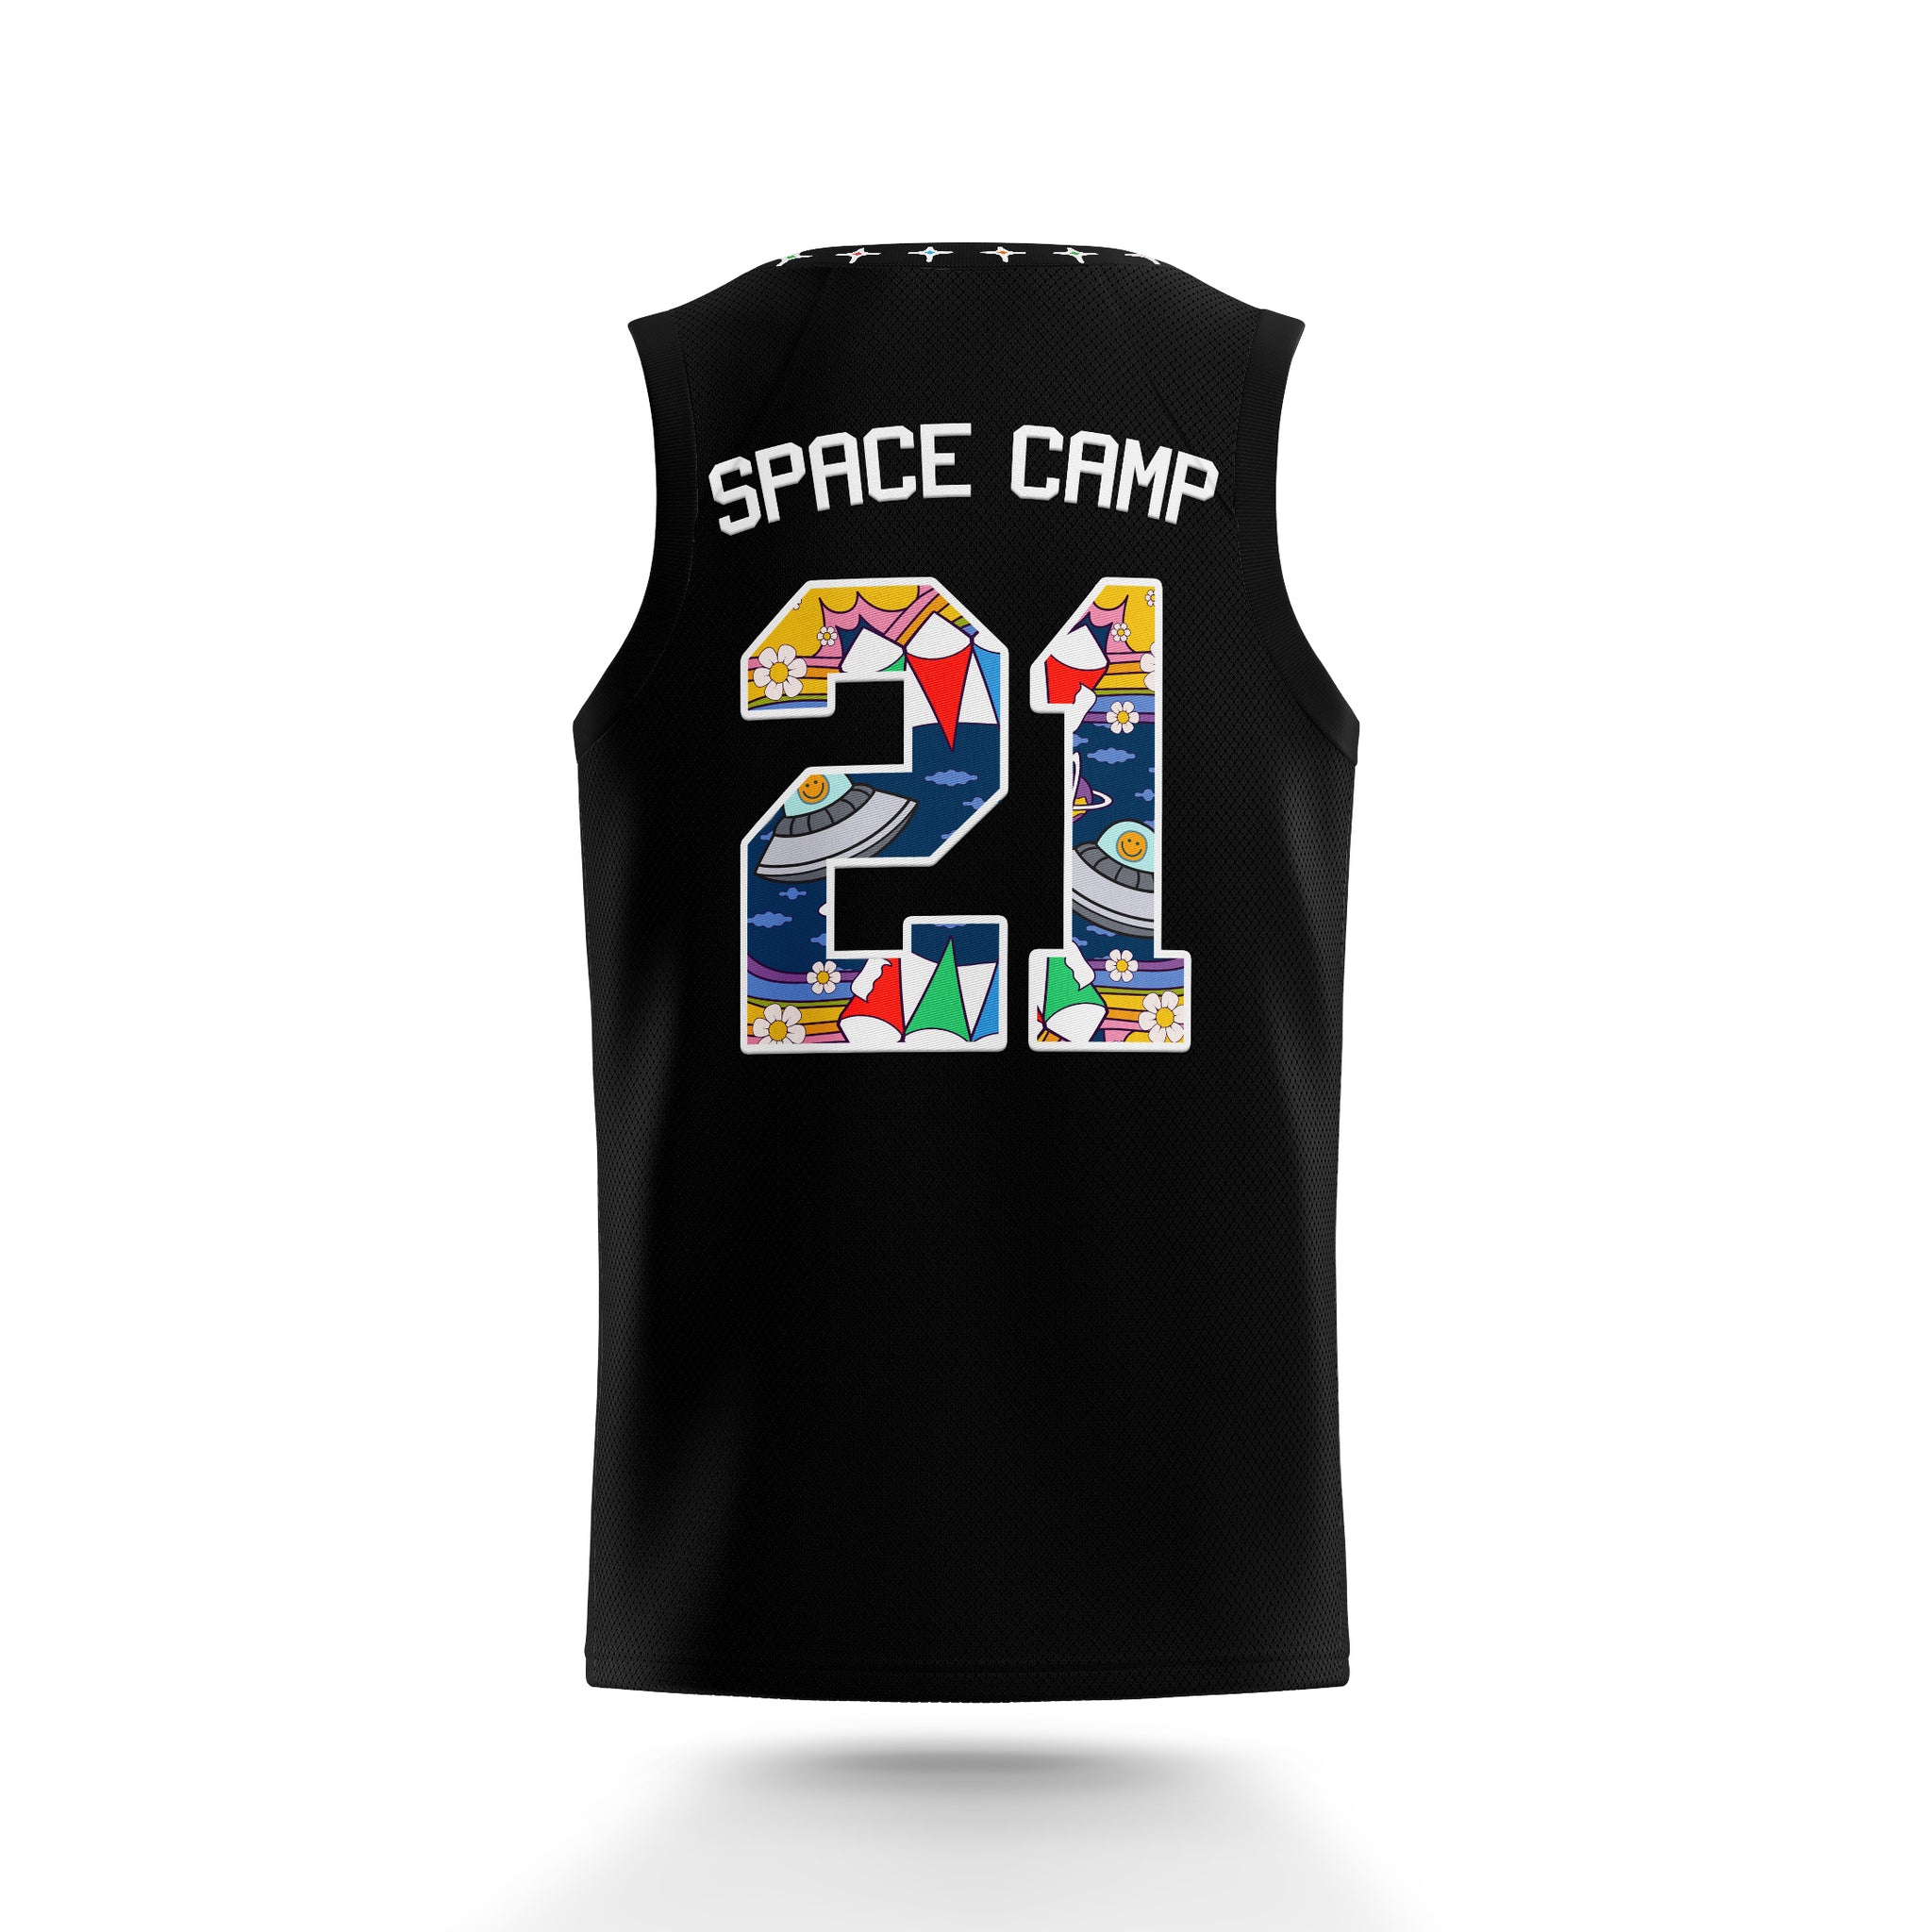 SPACE CAMP BASKETBALL JERSEY